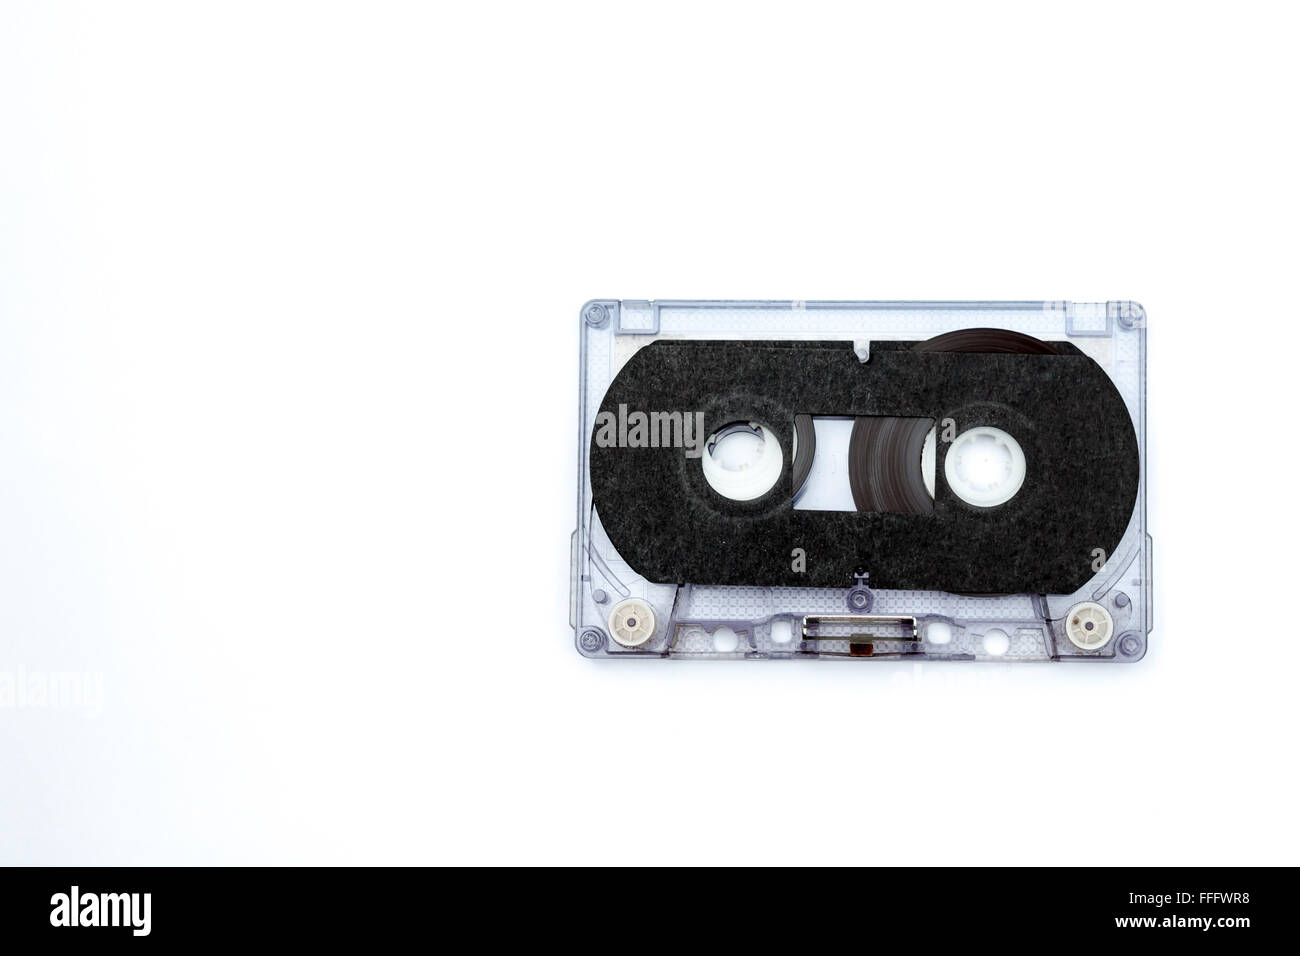 unrolled music cassette on an white background Stock Photo